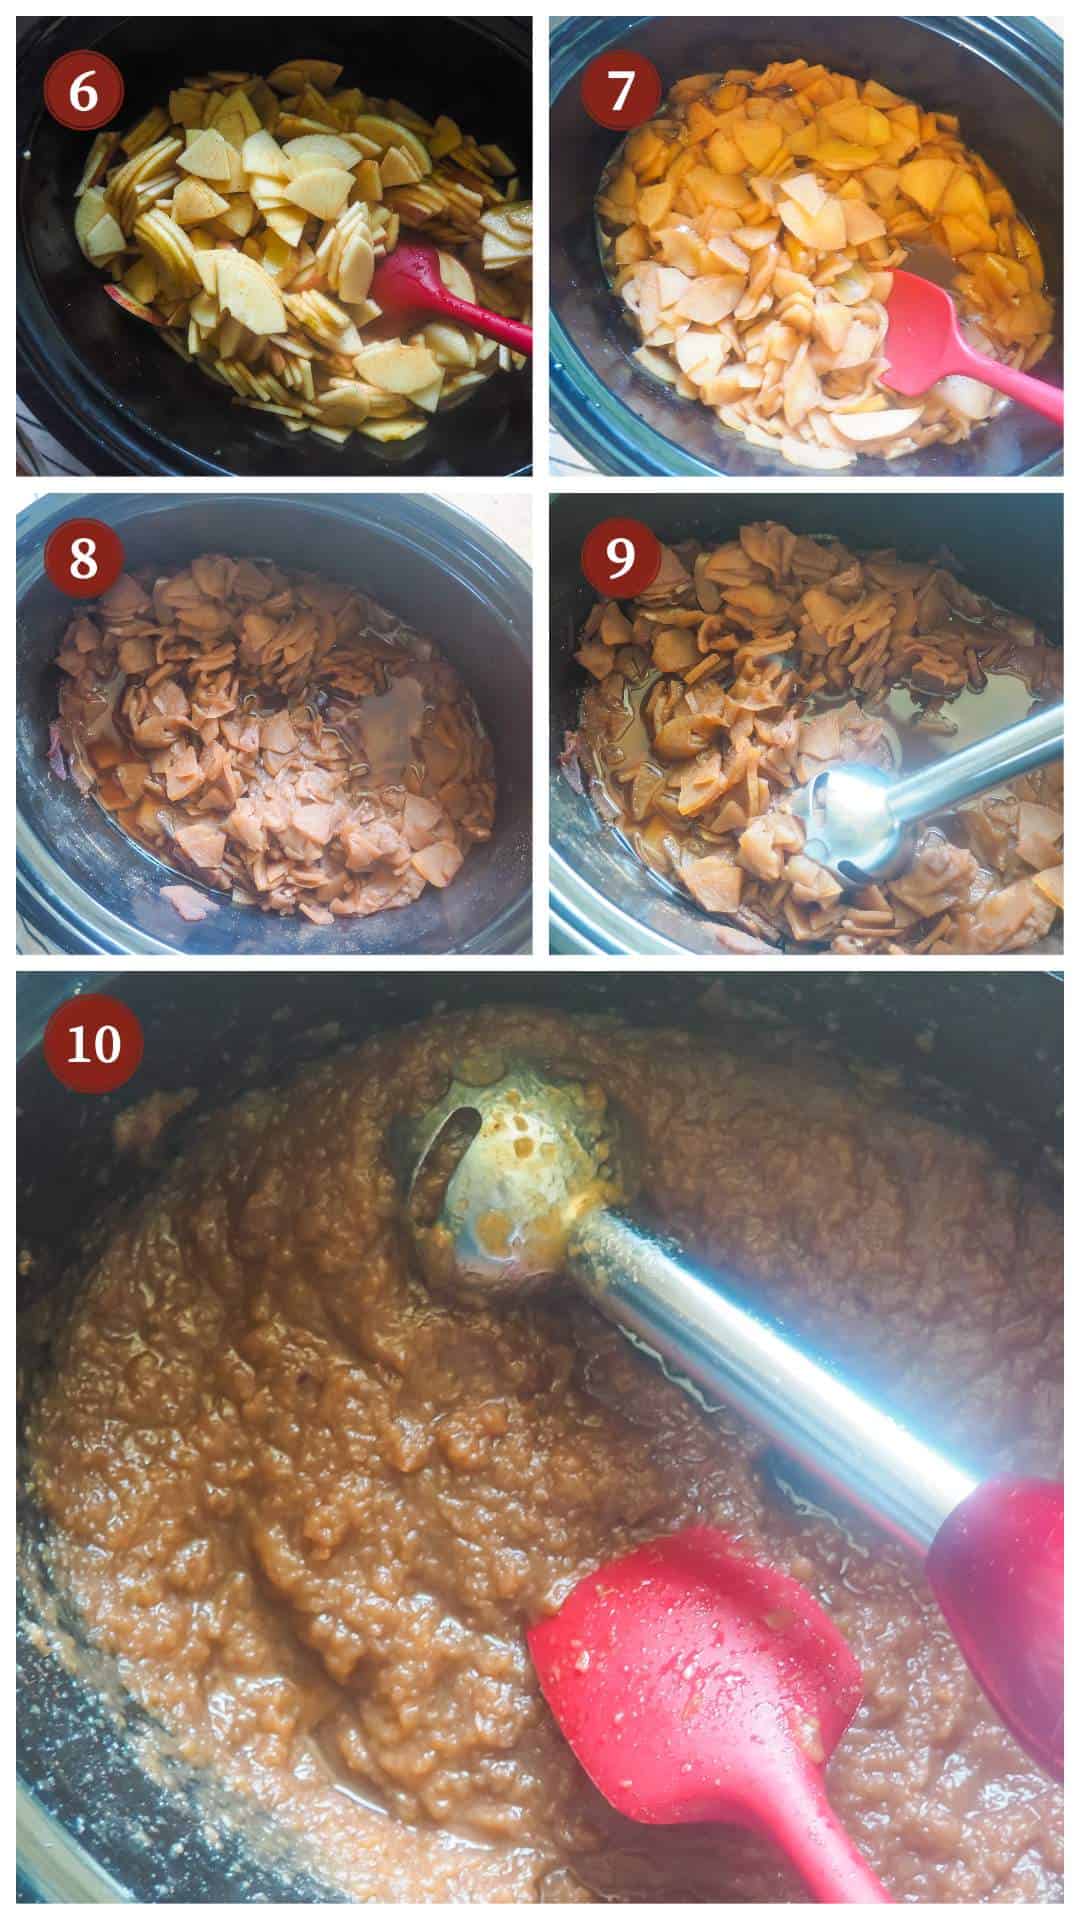 a collage of images showing how to make apple butter, steps 6 - 10.